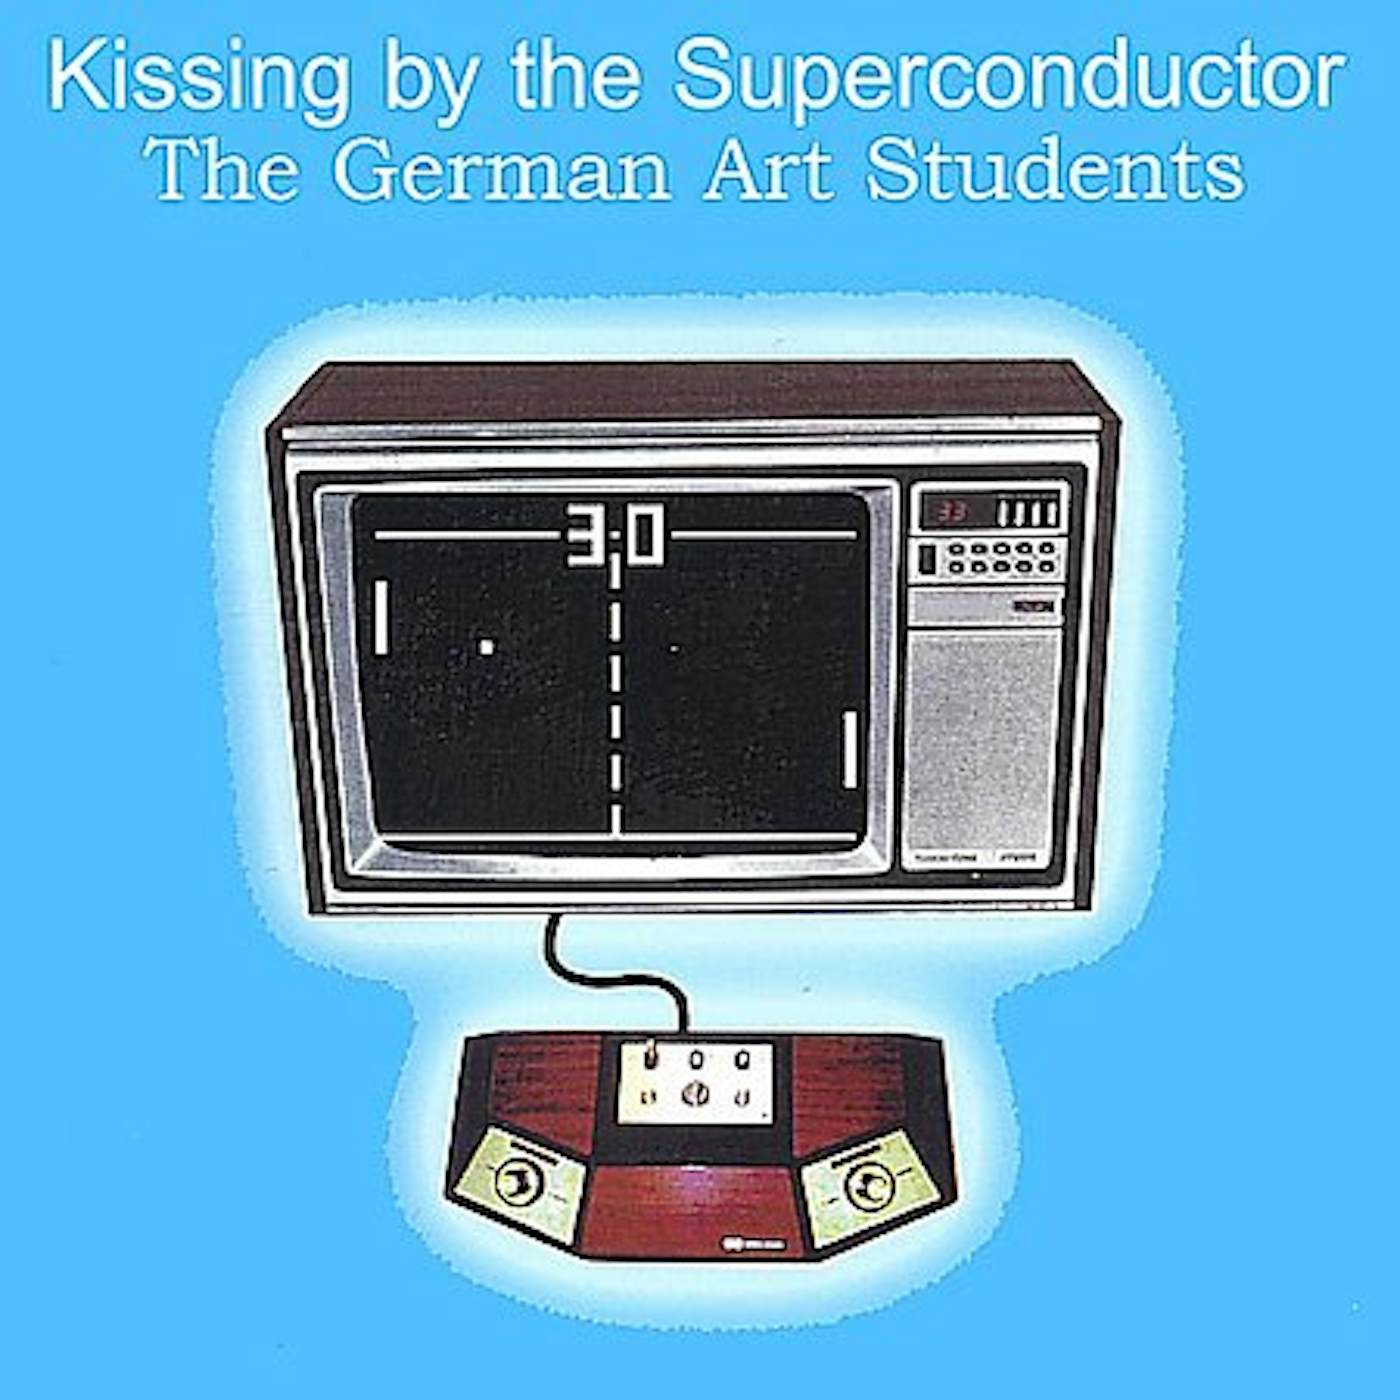 The German Art Students KISSING BY THE SUPERCONDUCTOR CD